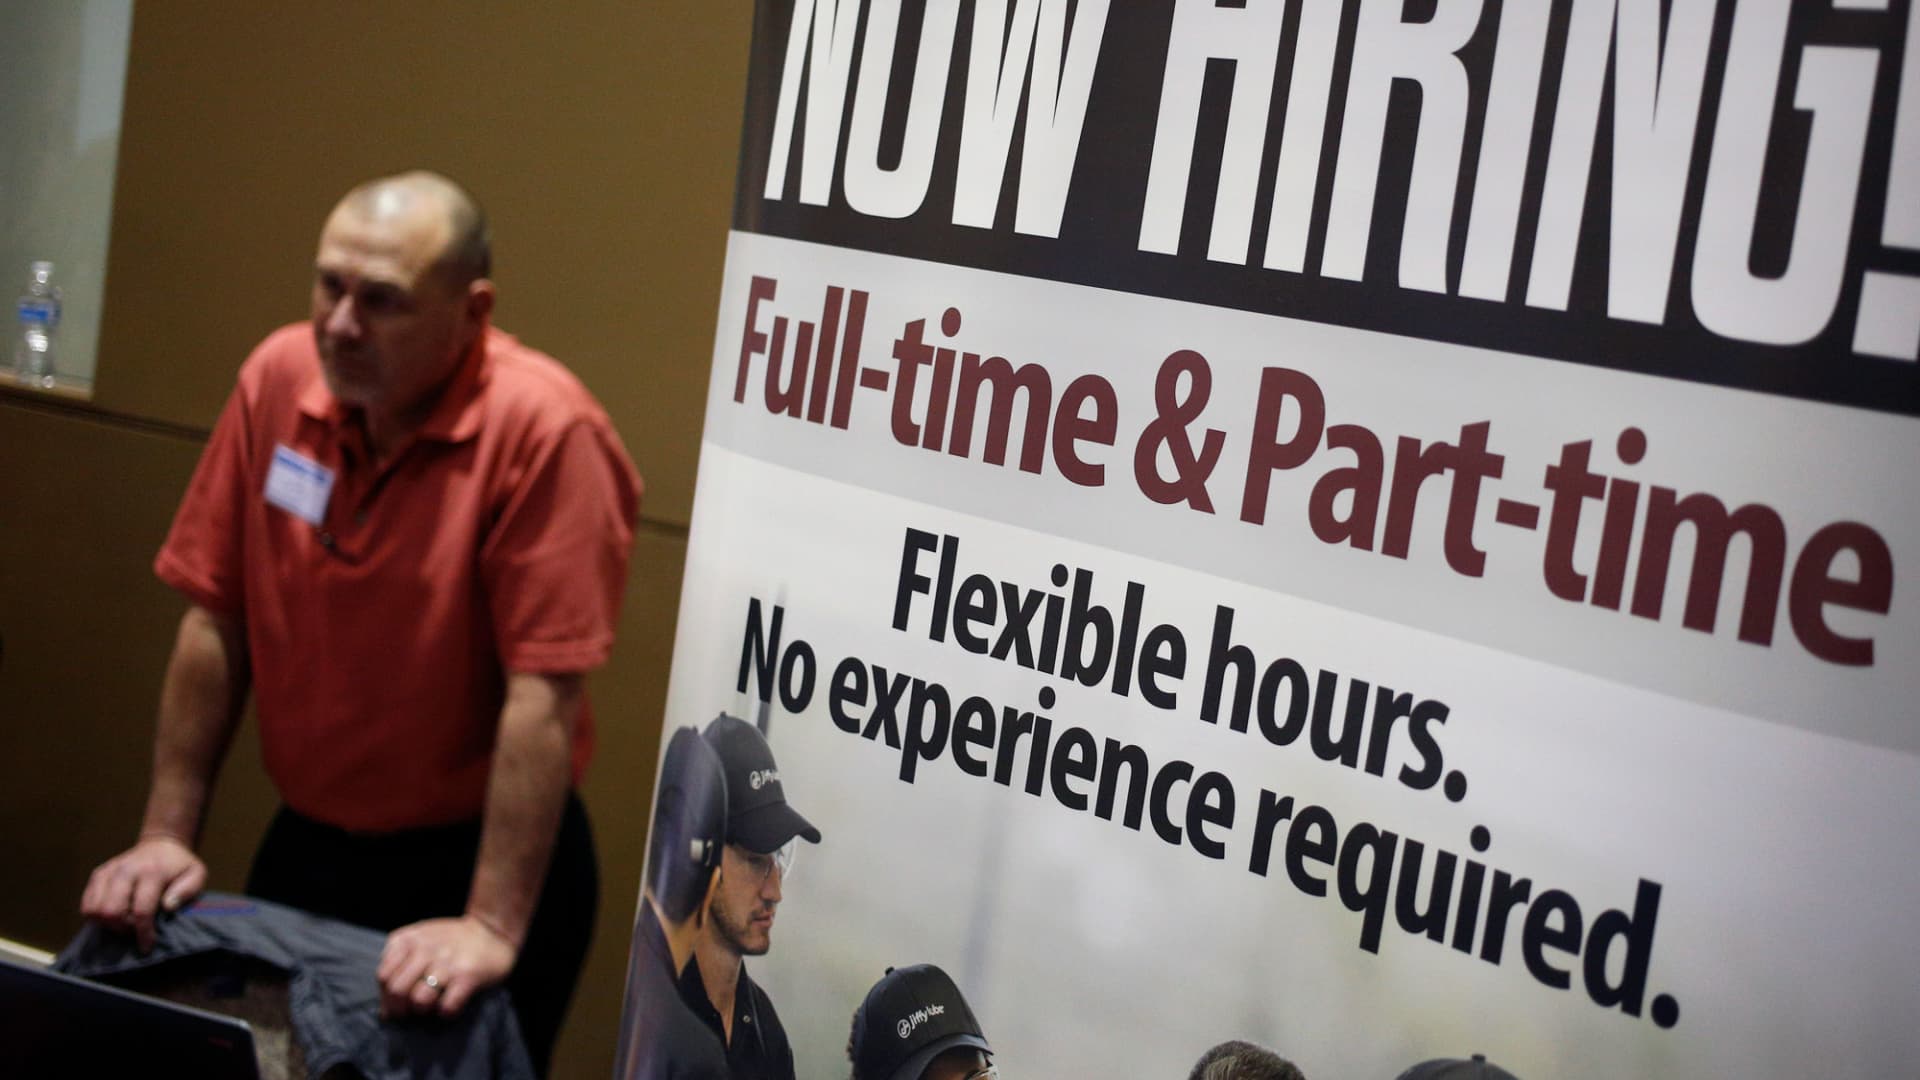 Job growth totaled 303,000 in March, better than expected, and unemployment was 3.8%